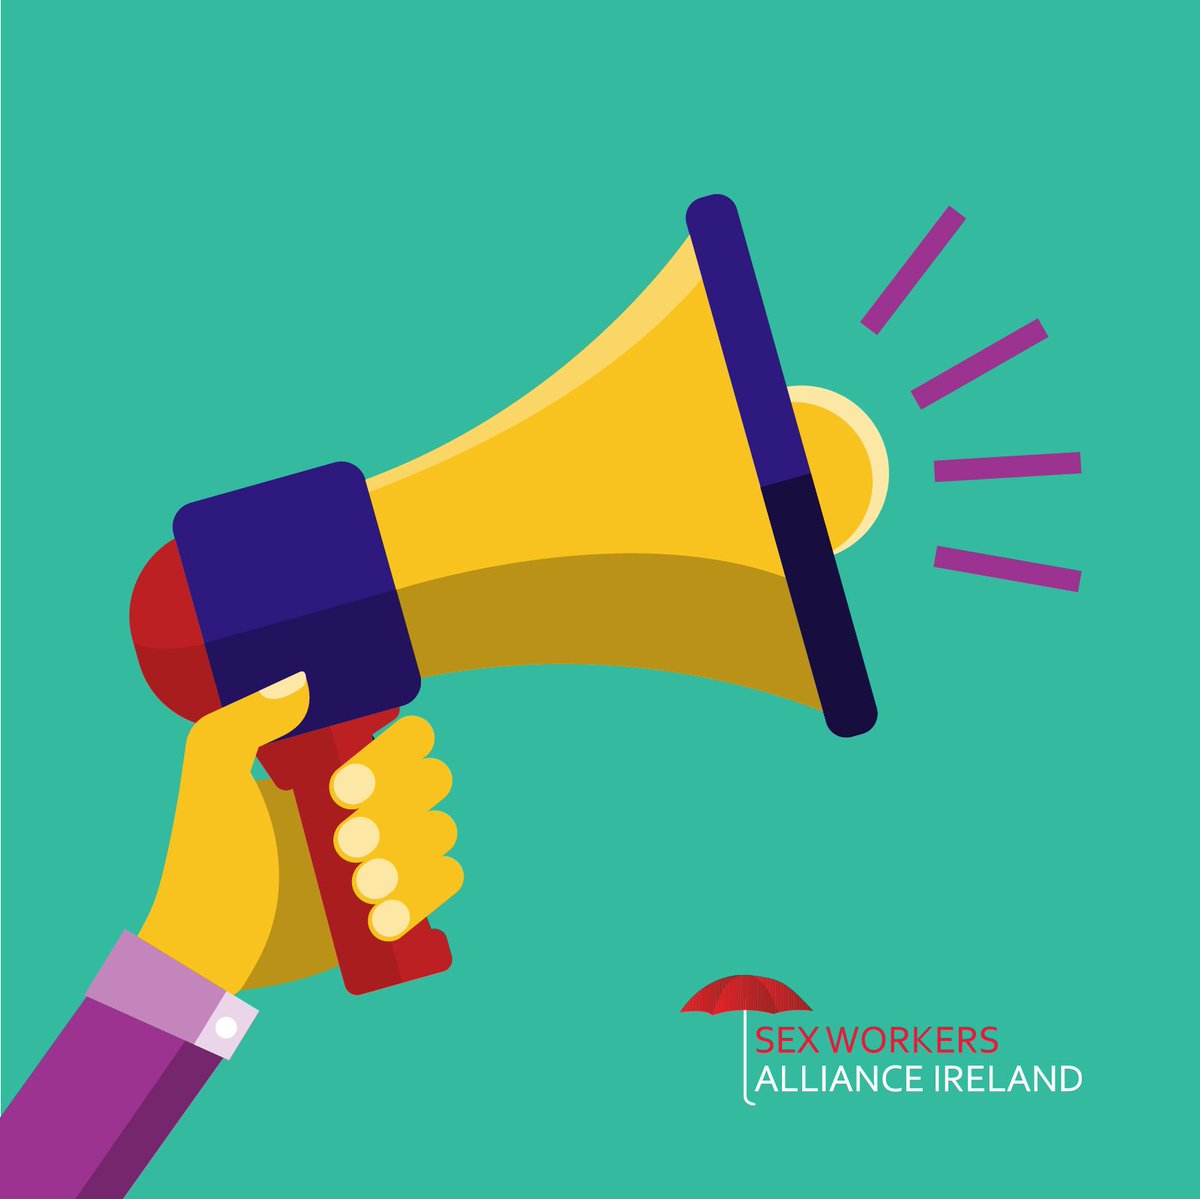 Why not keep up with the Sex Workers Alliance Ireland in the new year? Want to find out how YOU can help us in our work? Sign up for our newsletter here: eepurl.com/hig-DT #SupportSafeSexWork